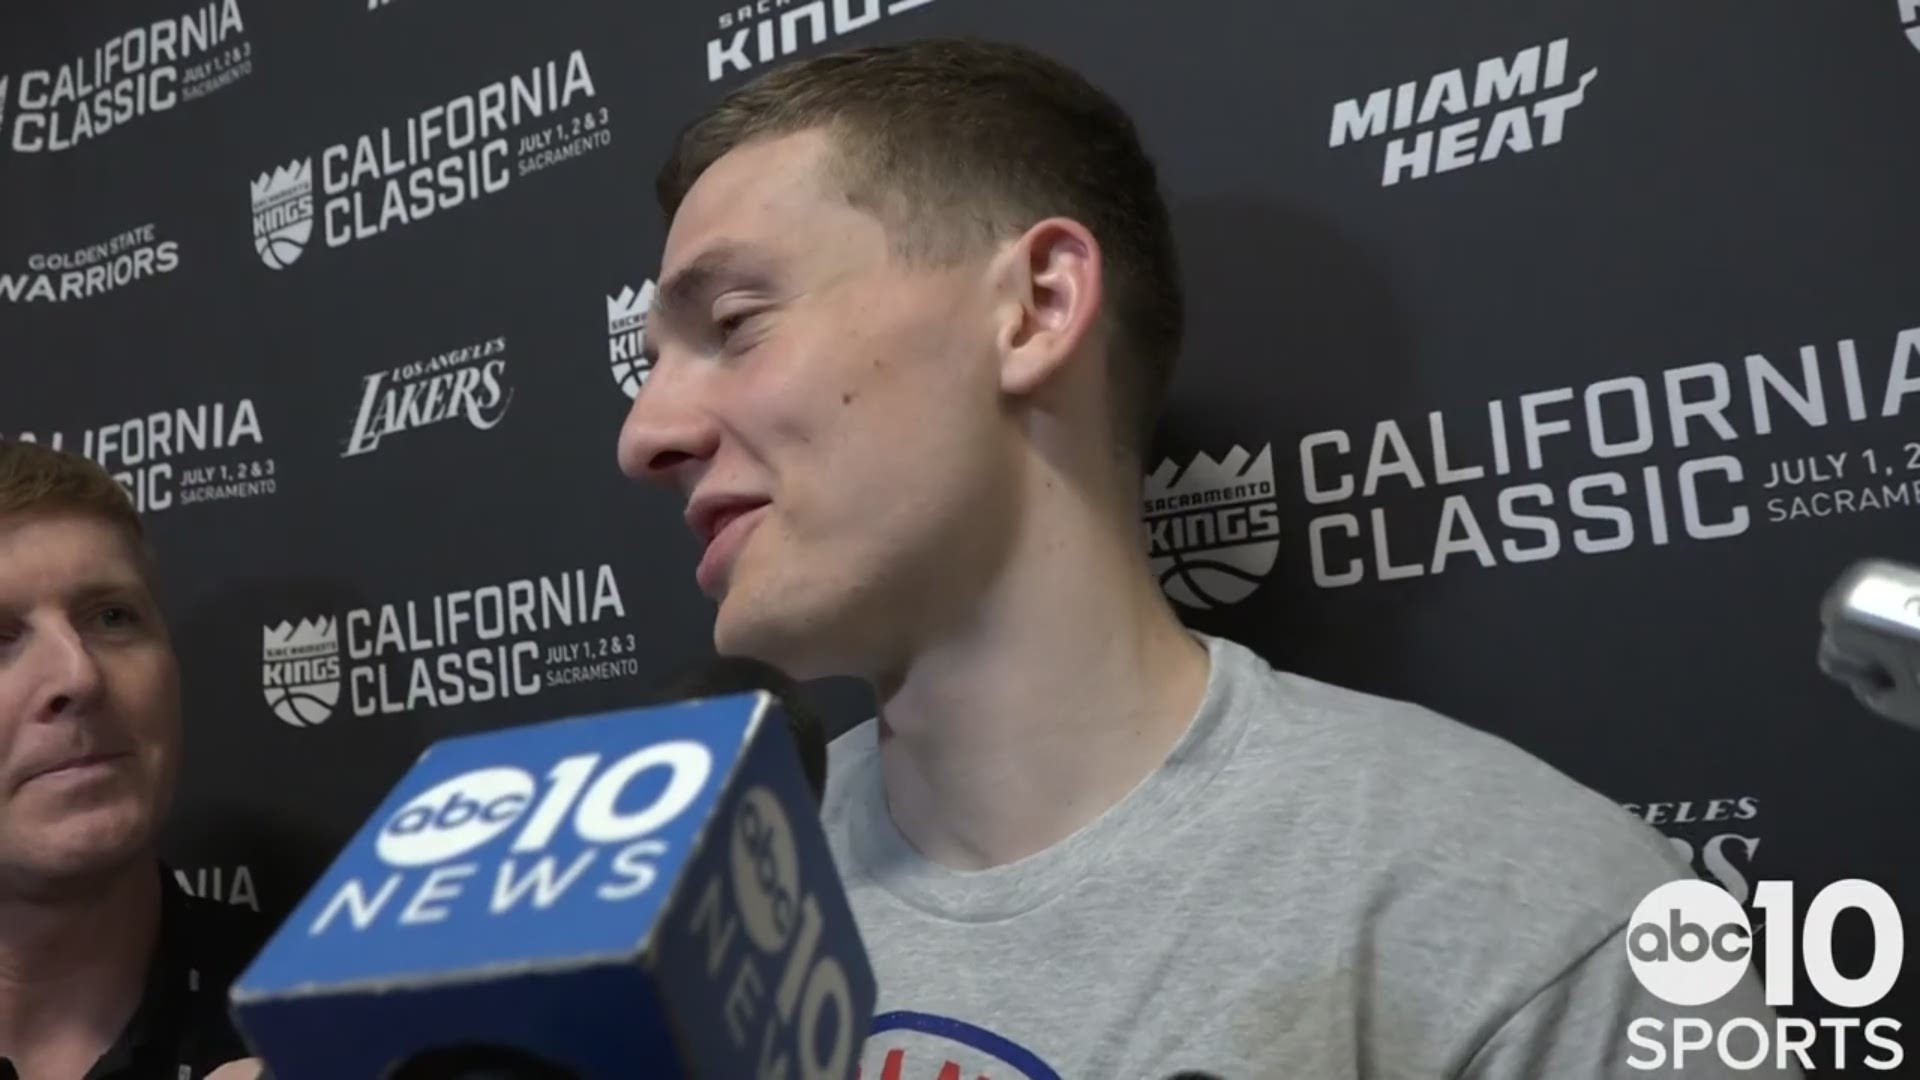 Kings rookie guard Kyle Guy talks about his first experience with fans in Sacramento, after competing in the first summer league game against the Golden State Warriors on Monday night. He talks about his performance in the win and squaring off against Jimmer Fredette.